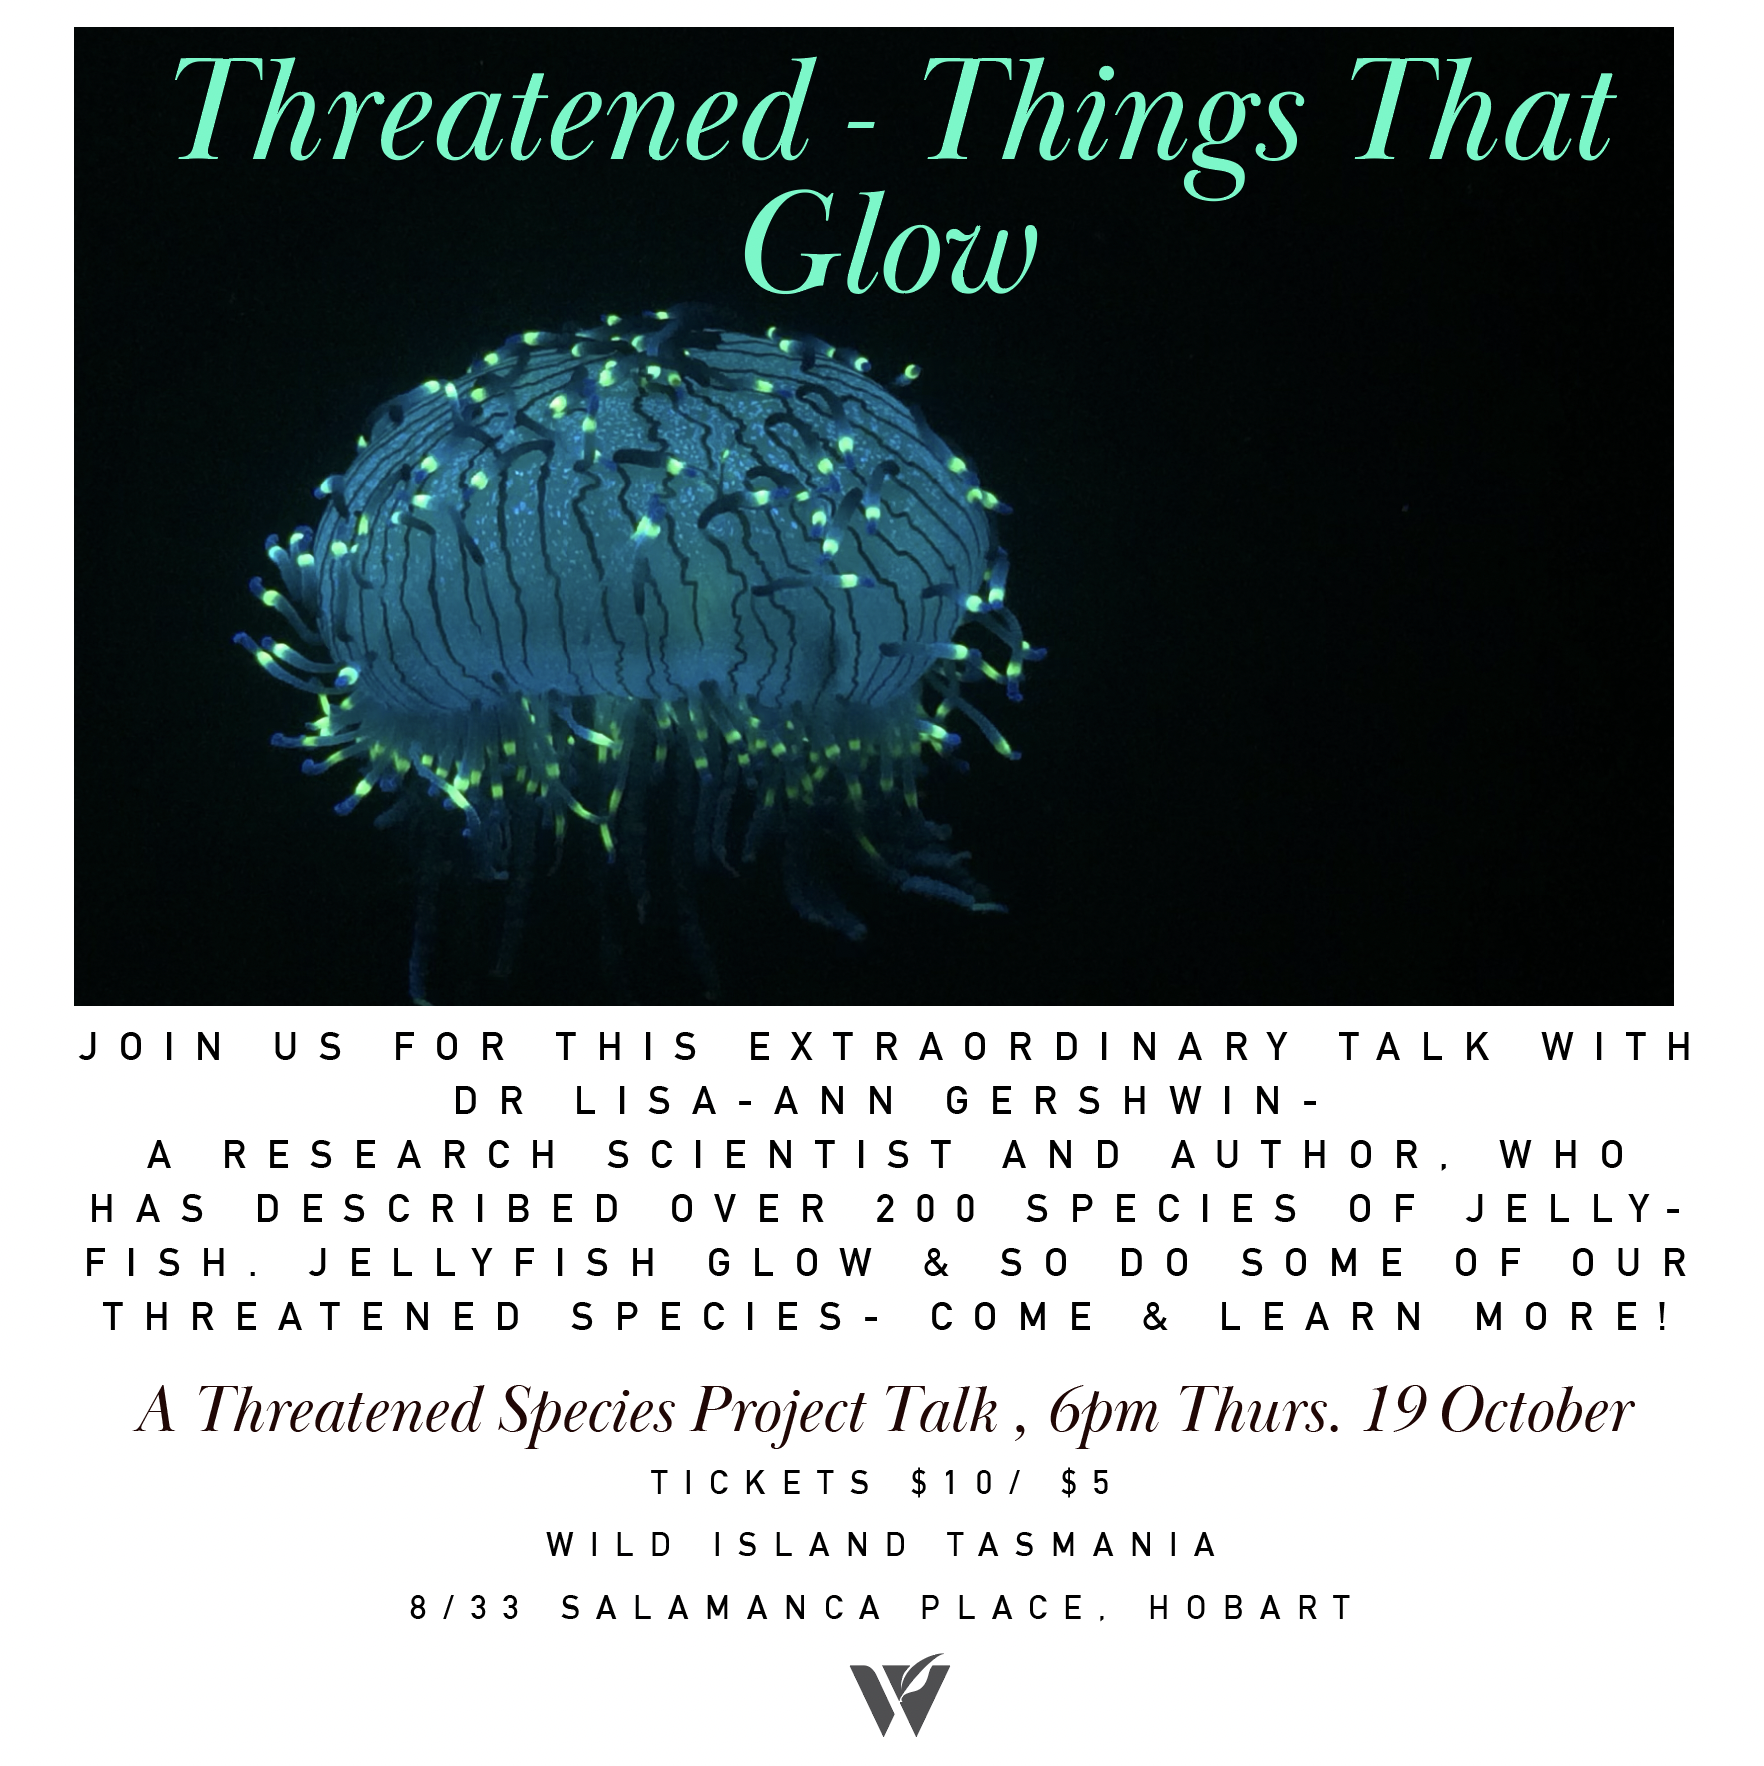 Things That Glow - A Threatened Species Project Talk